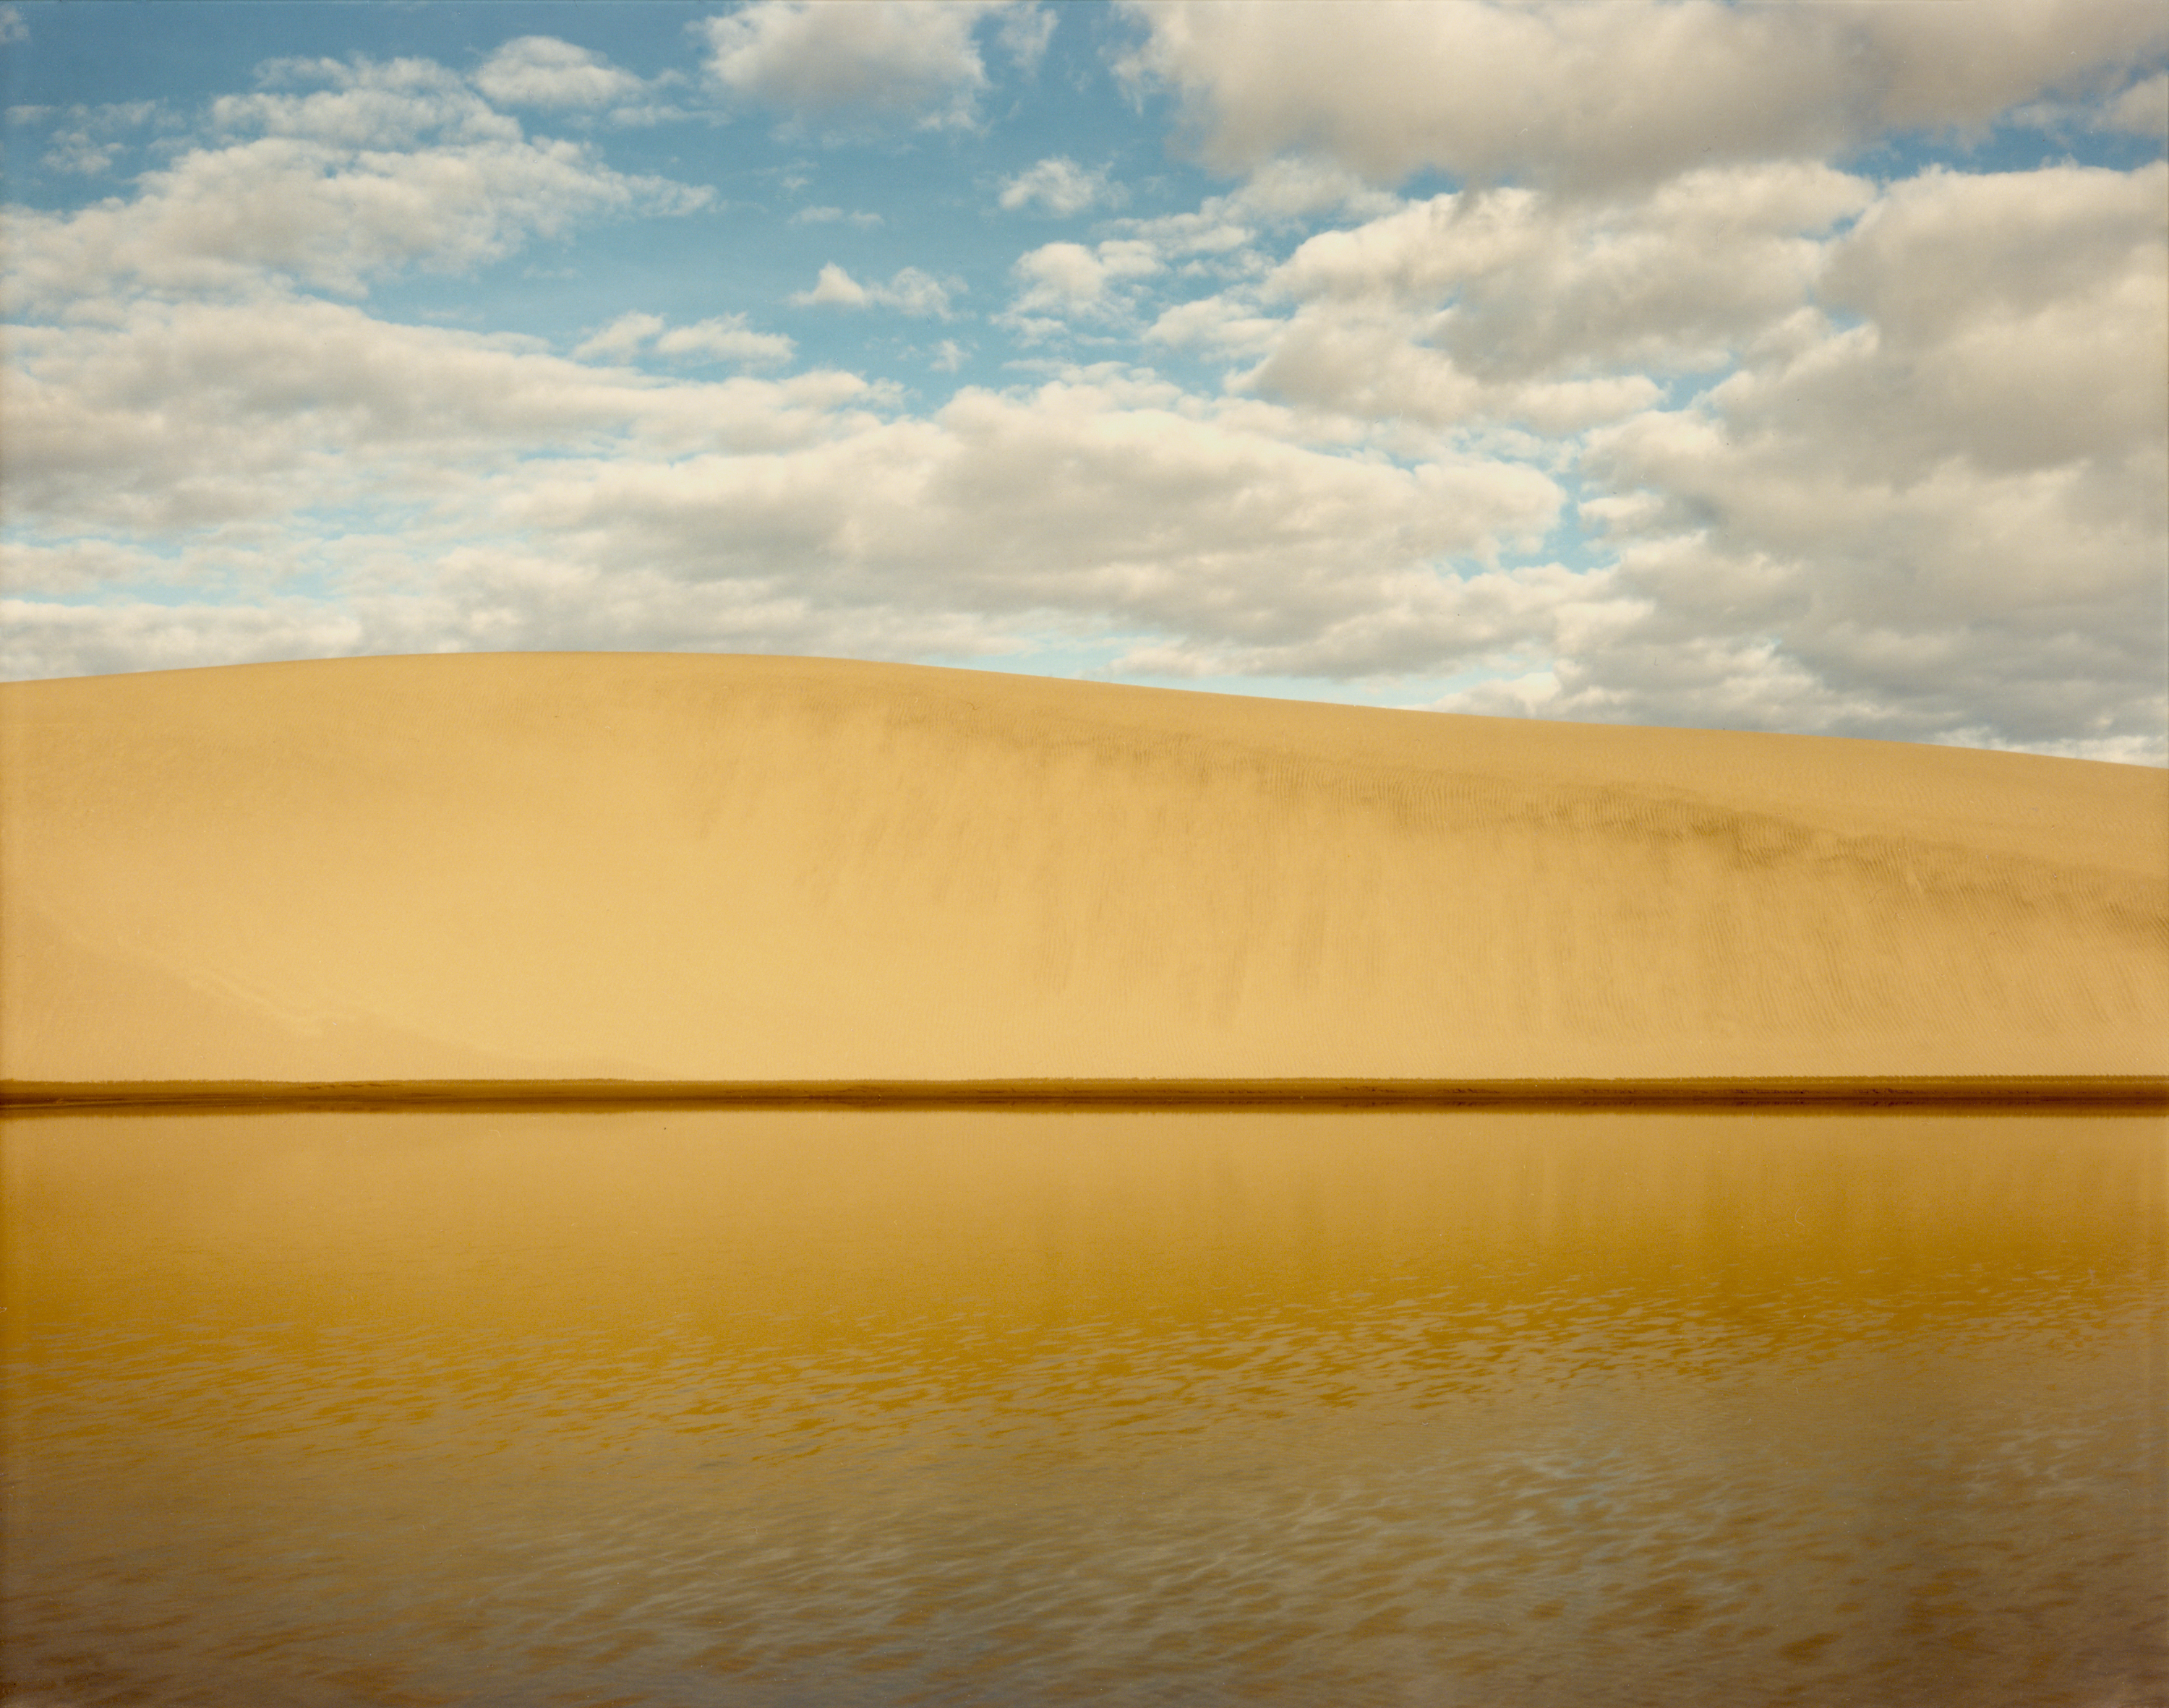 Color photograph of a body of water near a sand hill with a bright blue cloudy sky